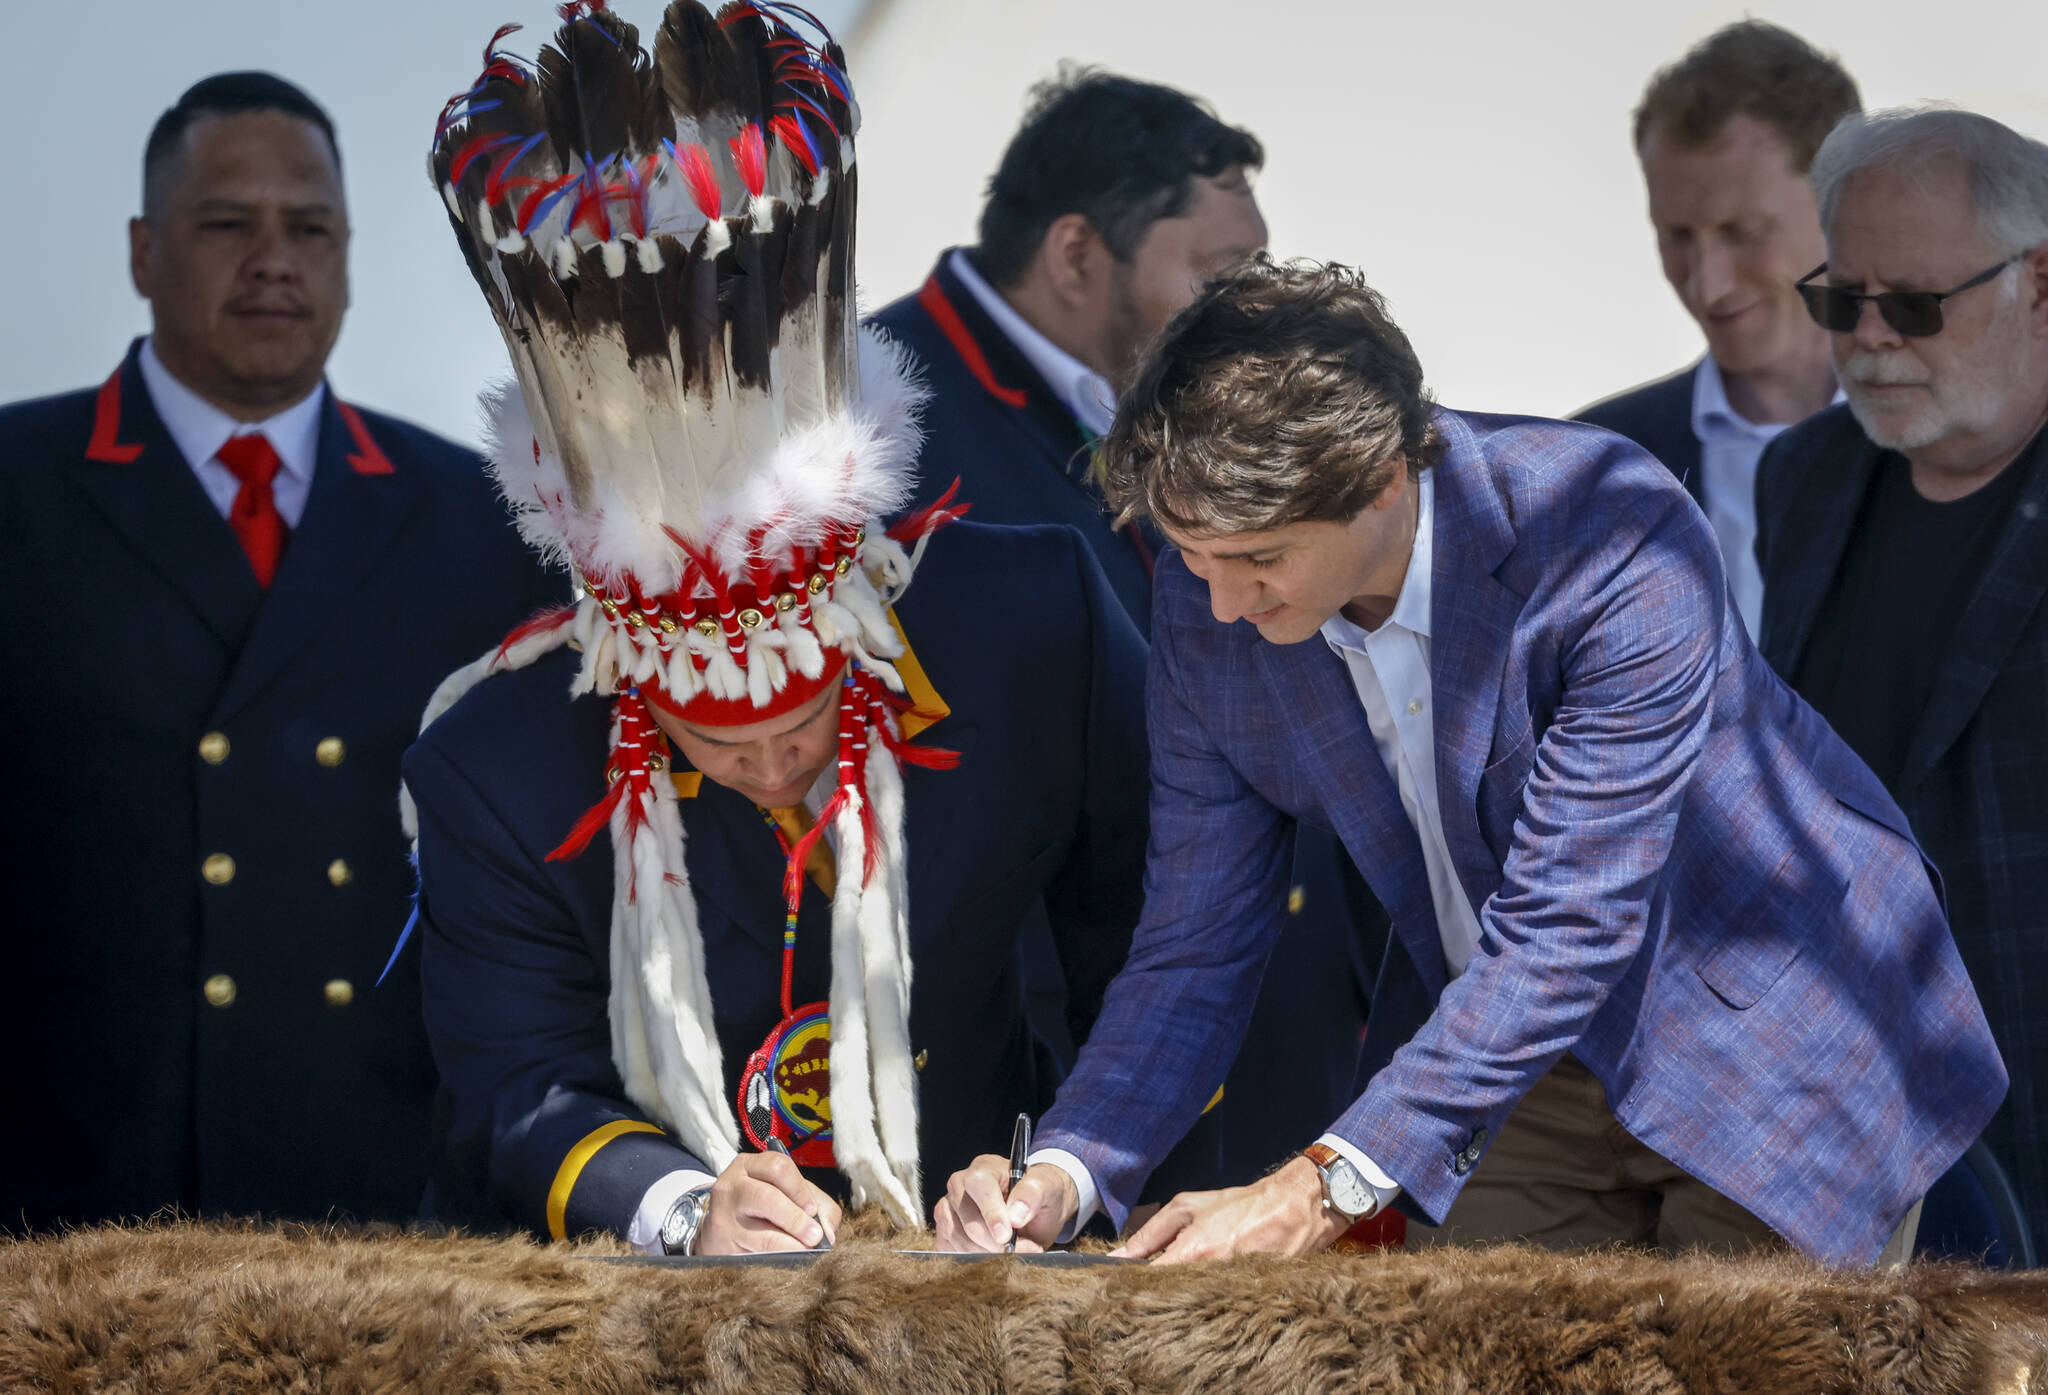 Prime Minister Justin Trudeau, right, and Siksika Nation Chief Ouray Crowfoot participate in a signing ceremony on the Siksika Nation in Siksika Nation, Alta., Thursday, June 2, 2022.THE CANADIAN PRESS/Jeff McIntosh